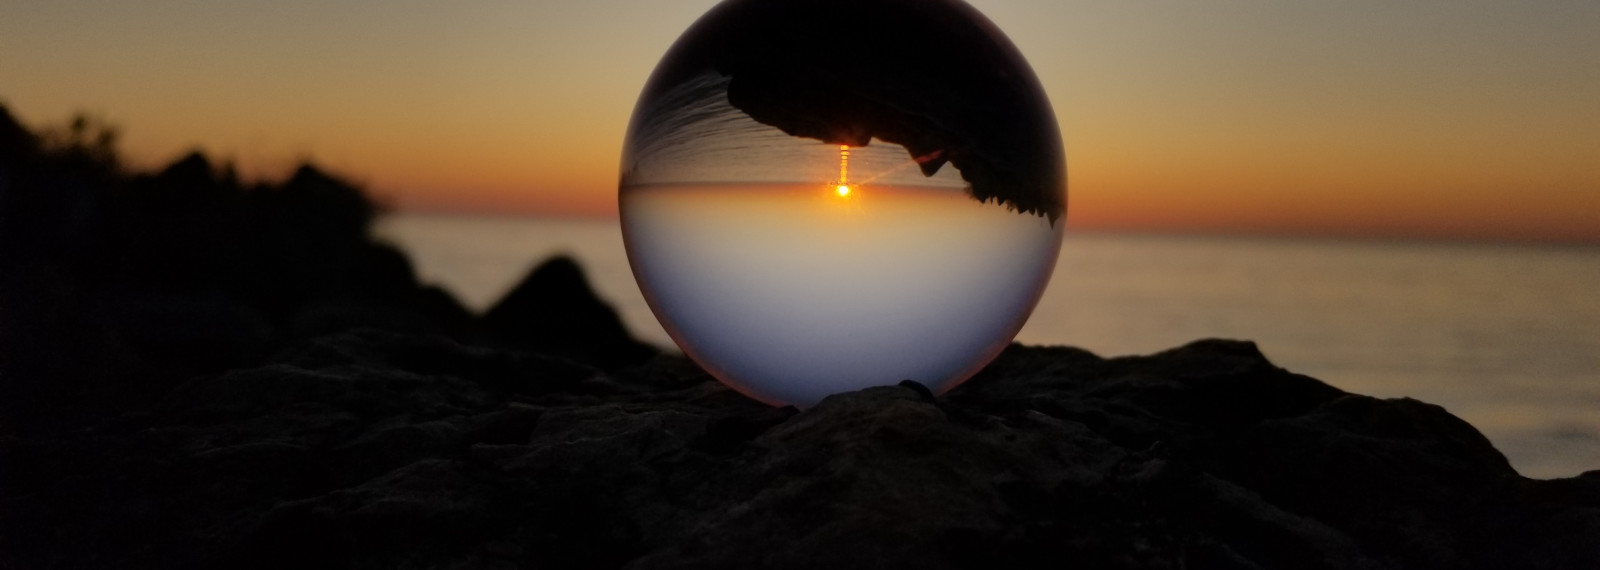 Image looking through a transparent sphere to a sunset